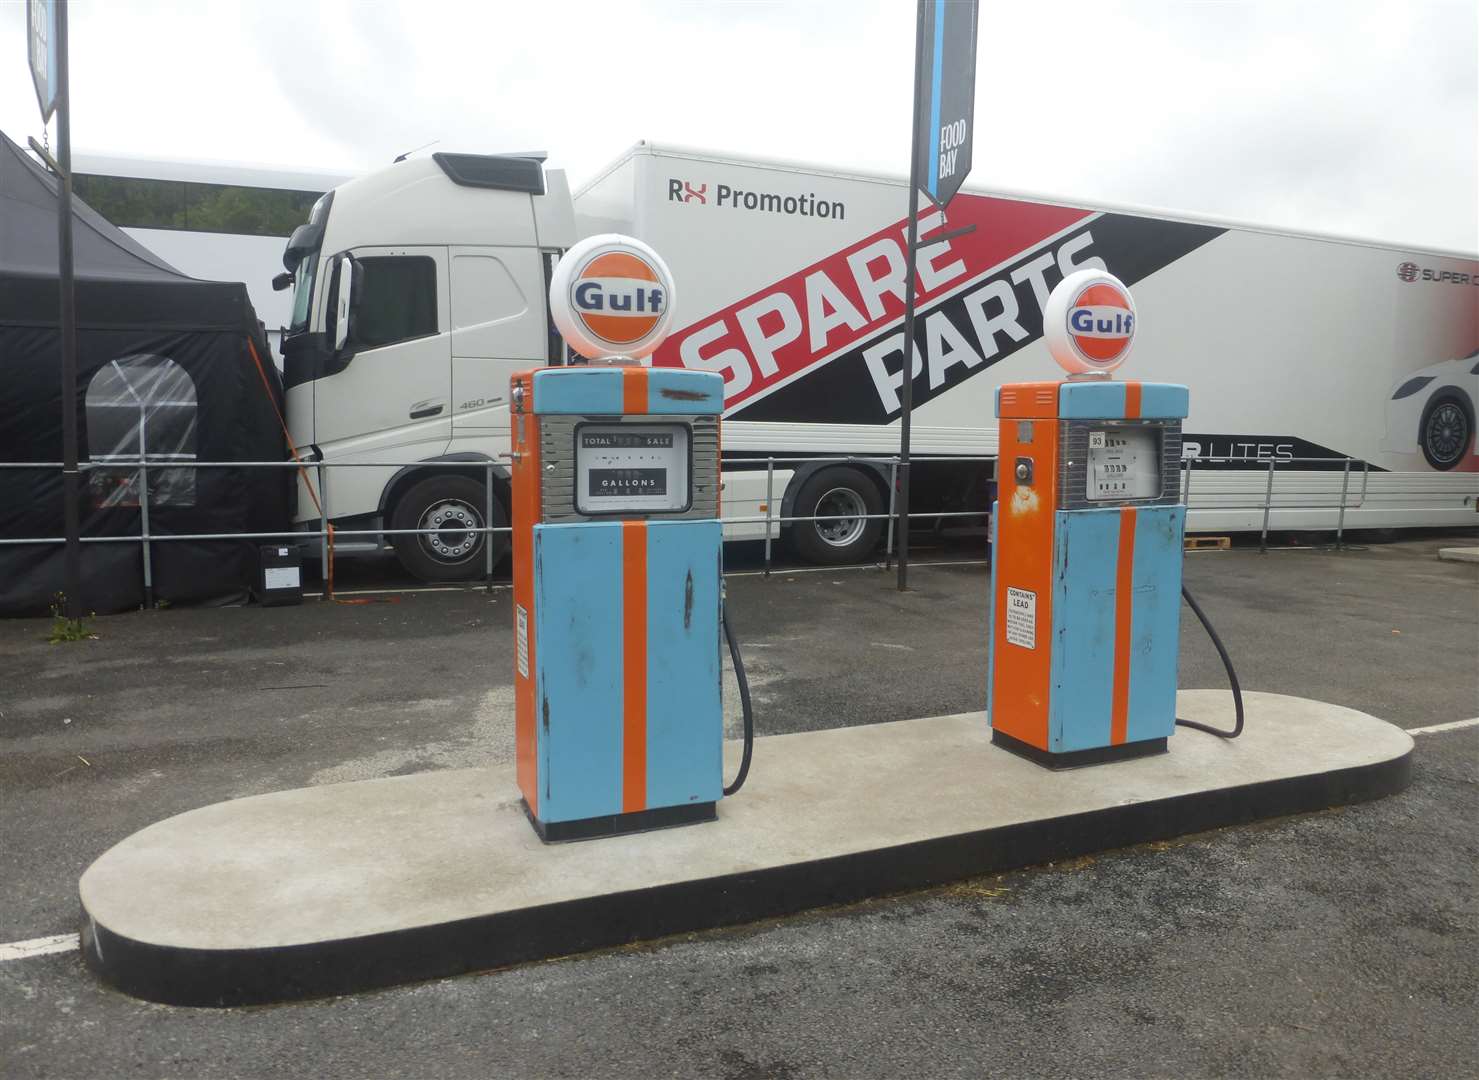 Doran installed old Gulf fuel pumps in the paddock during the off-season. Picture: Joe Wright